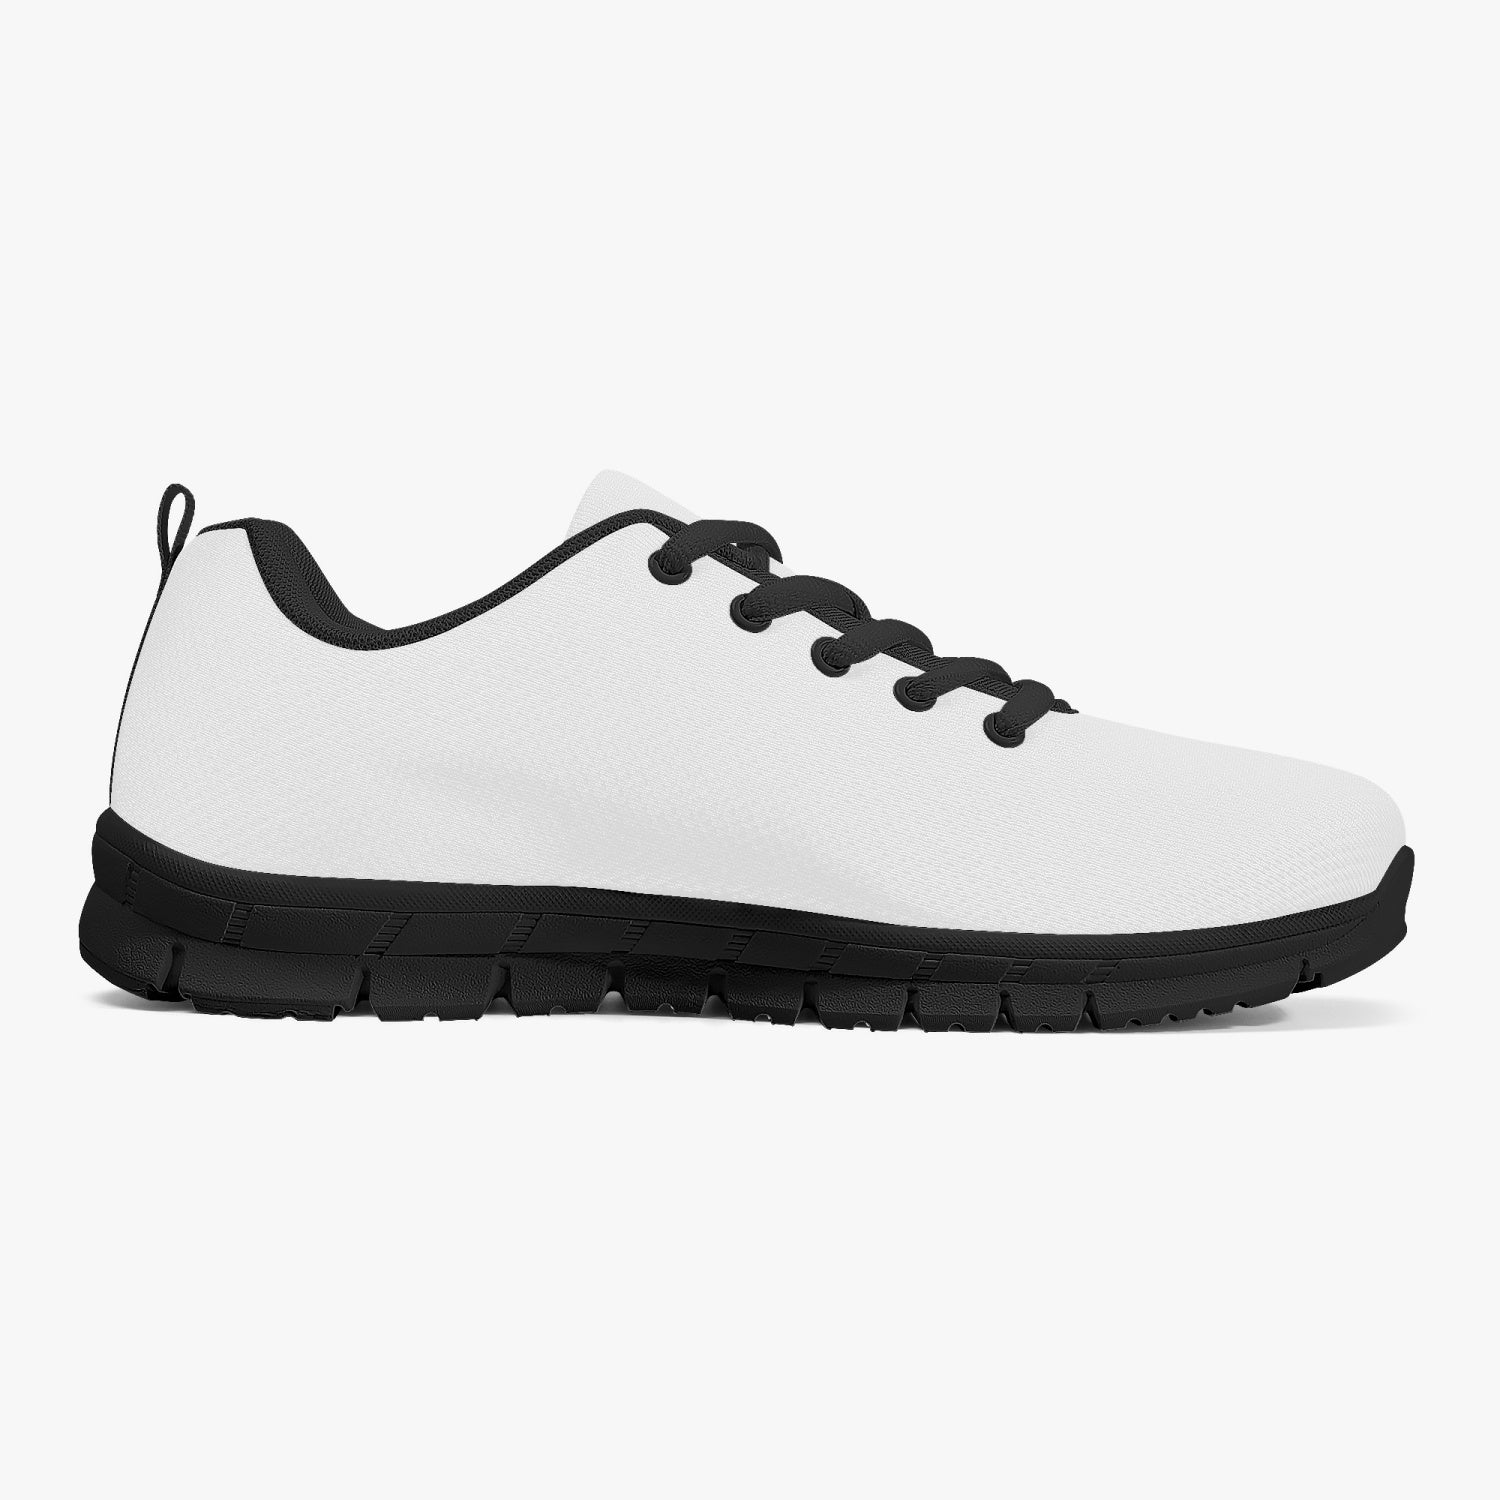 red Lightweight Mesh Sneakers - White/Black